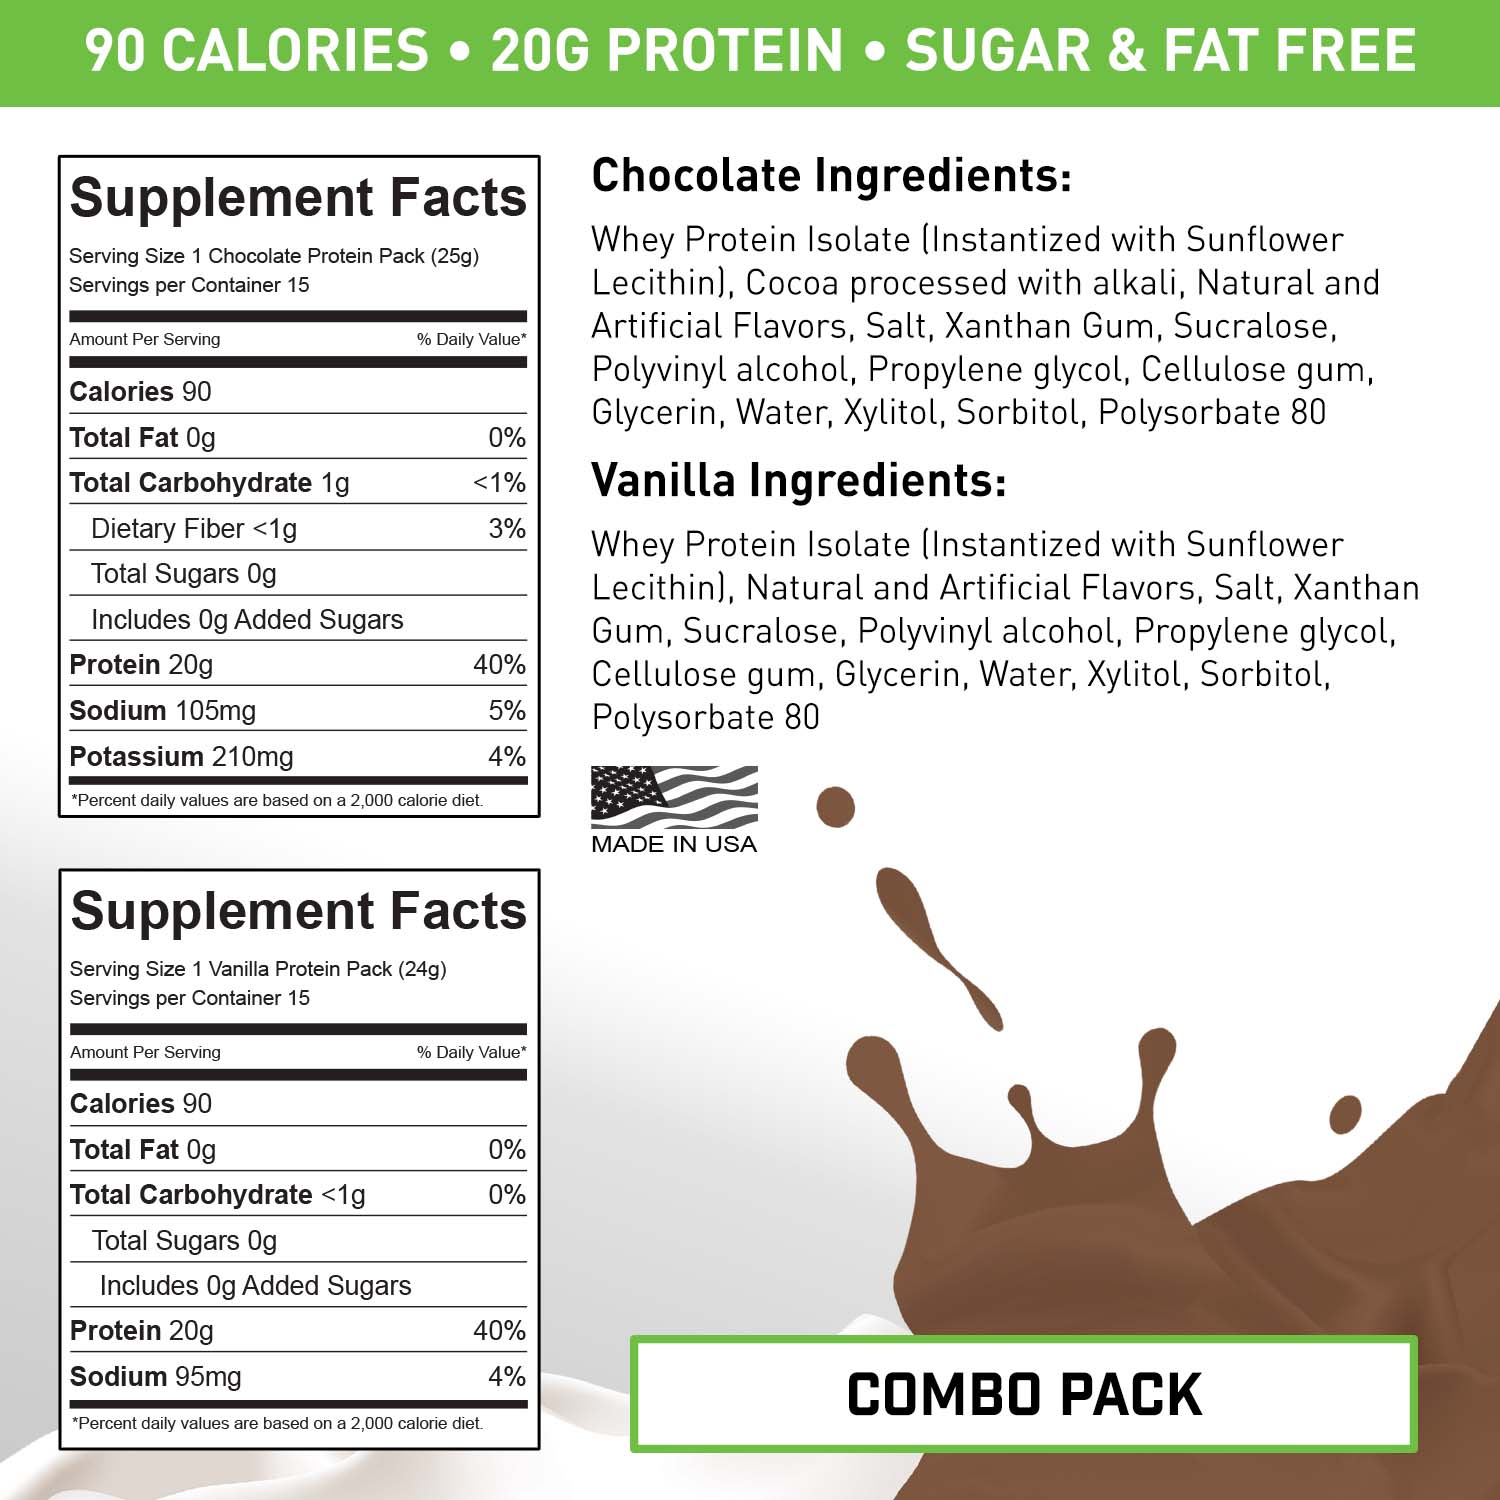  VADE Nutrition Dissolvable Protein Packs - 100% Whey Isolate  Protein Powder Vanilla Milkshake - Low Carb, Low Calorie, Lactose Free,  Sugar Free, Fat Free, Gluten Free - 30 Packets to Go : Health & Household